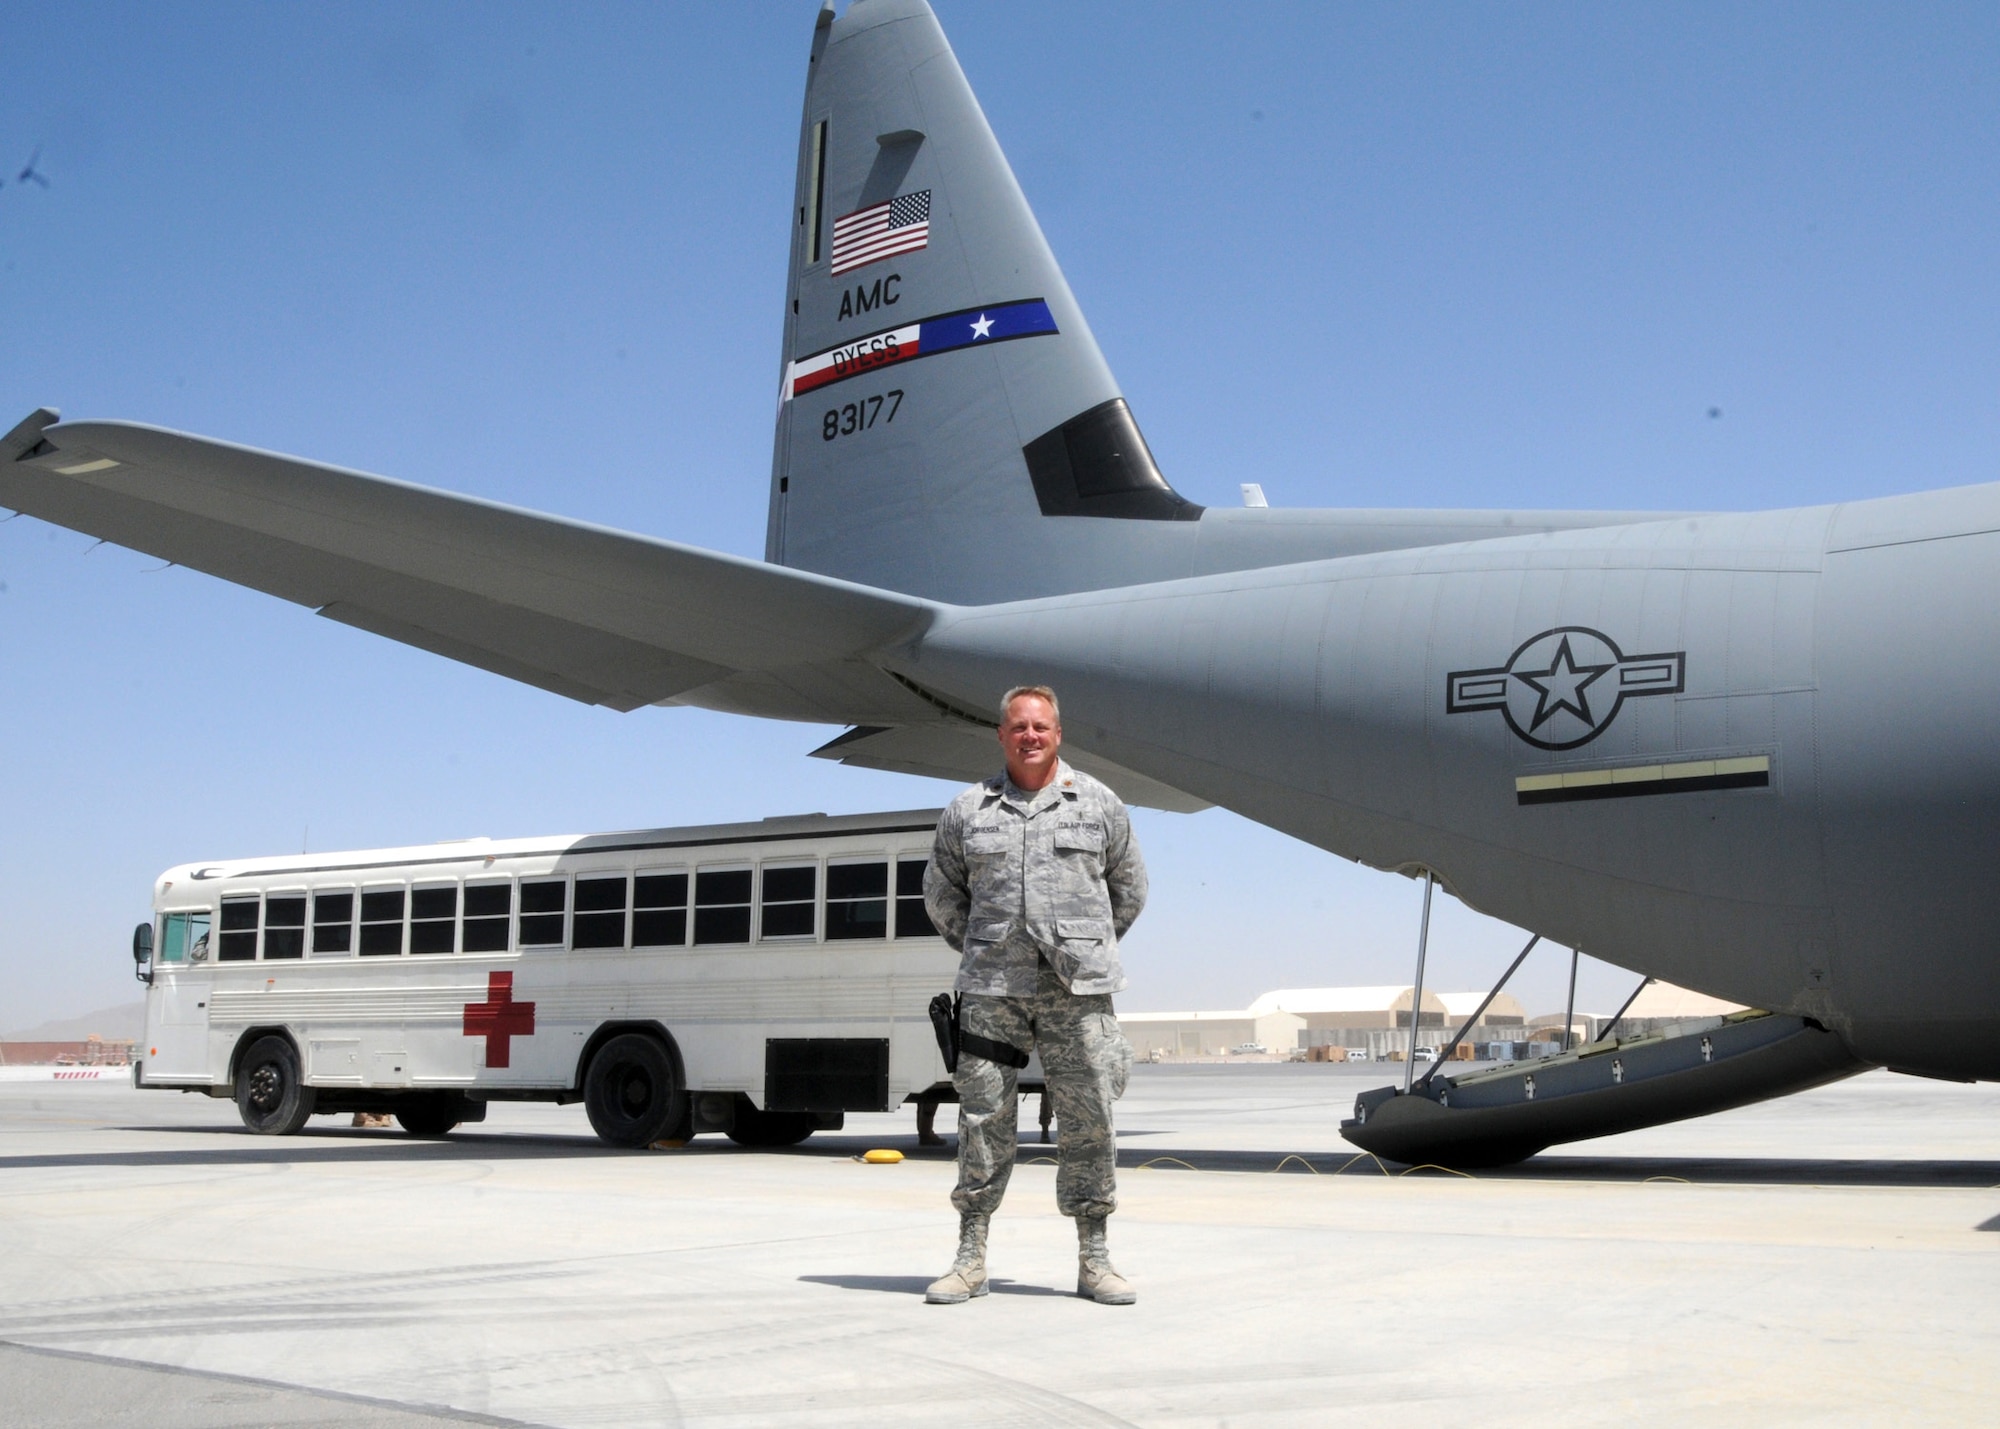 Maj. Peter Jorgensen, 651st Expeditionary Aeromedical Evacuation Squadron, Kandahar Airfield, Afghanistan, director of operations in front of a medical bus and C-130 Hercules aircraft, April 6, 2012. Jorgensen is deployed from the 446th Aeromedical Evacuation Squadron, McChord Field, Wash. His role as 651st EAES director of operations is overseeing the daily duties of more than 100 people, who support around-the-clock aeromedical evacuations for more than 100,000 NATO troops. (U.S. Air Force photo/Staff Sgt. Heather Skinkle)